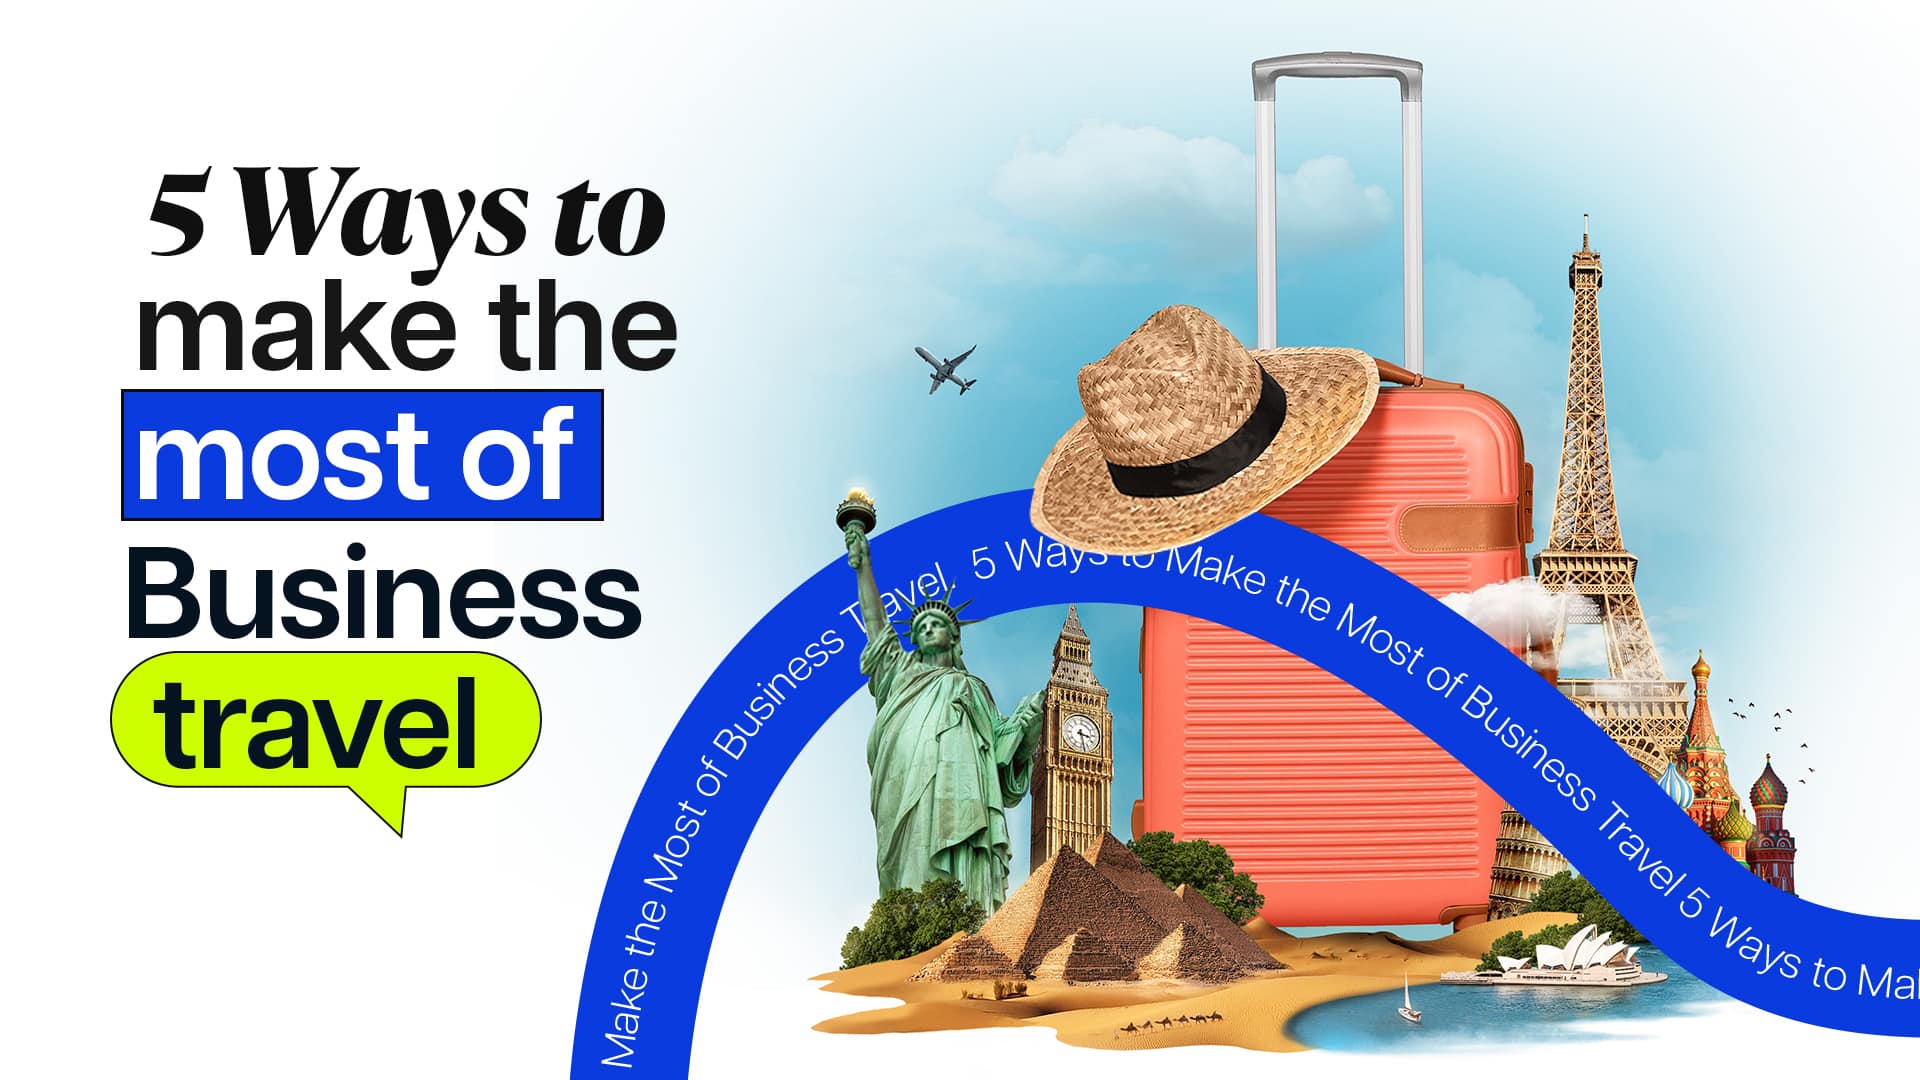 5 ways to make the most of business travel. - World-Hire : Plugging talent